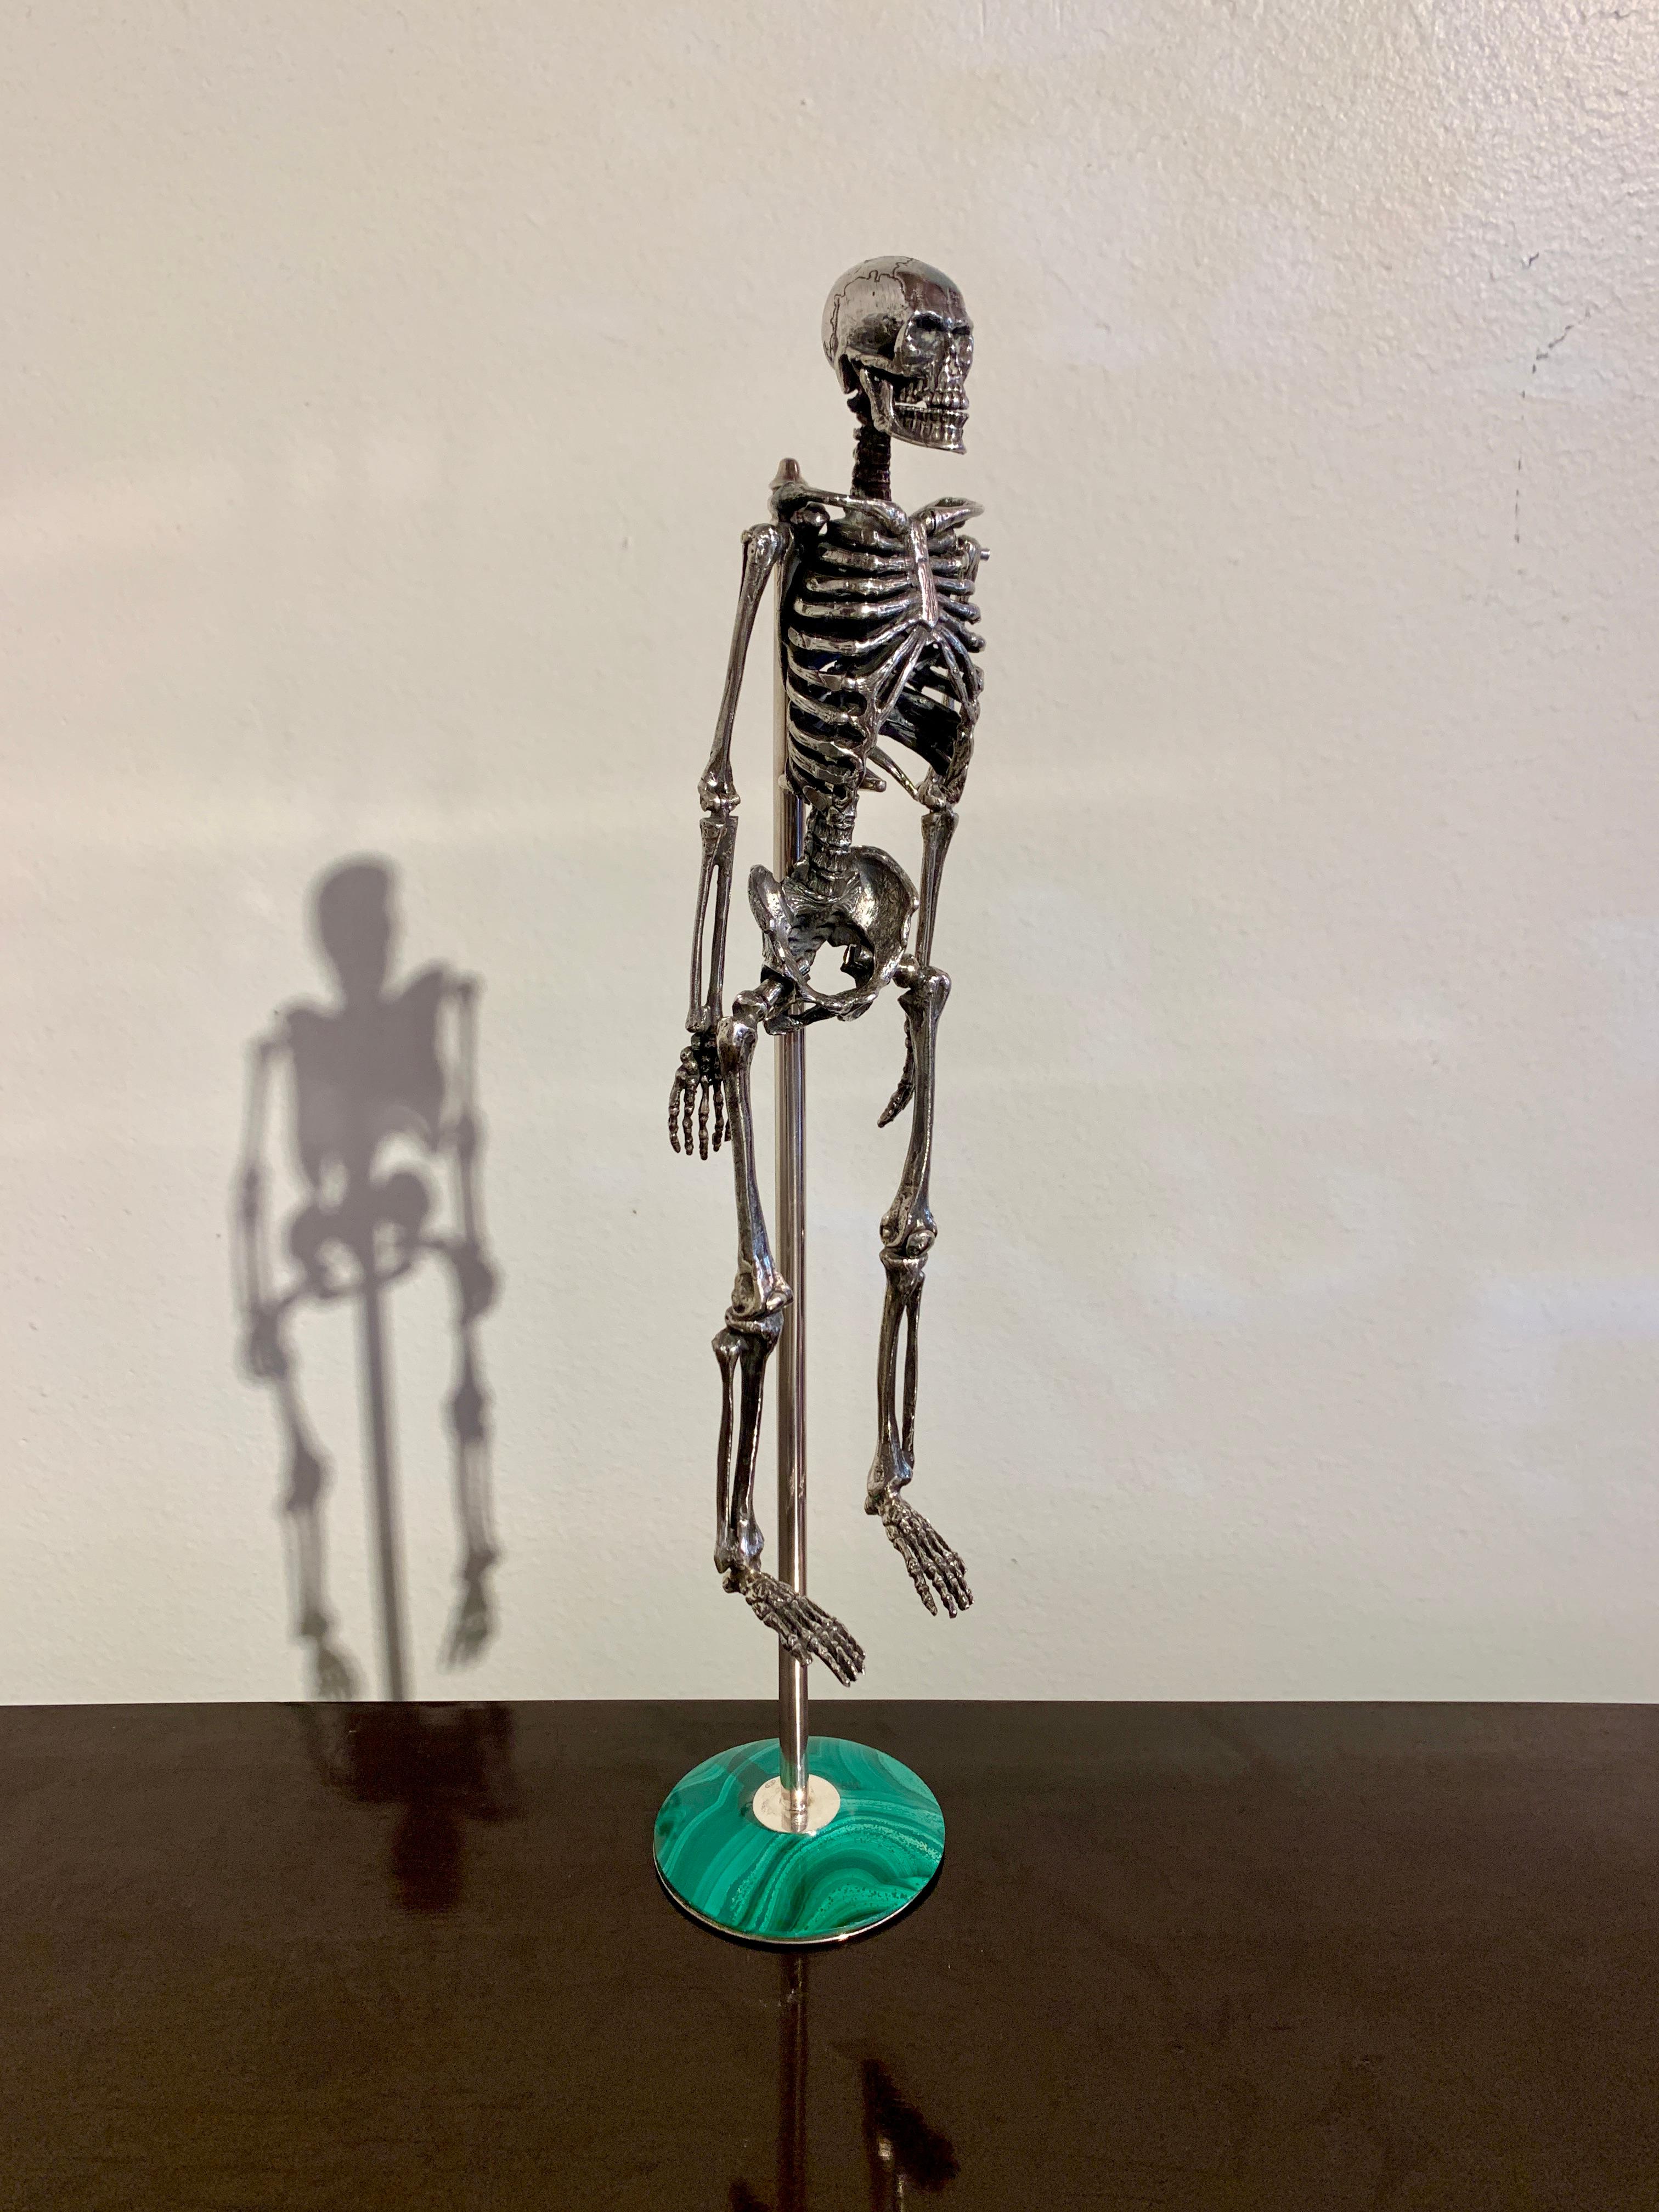 A fabulous Italian articulated model of a human skeleton on a silver and malachite stand, mid 20th century, Milan, Italy. 

The skeleton anatomically correct, with moving joints at the jaw, shoulders, elbows, hips and knees, allowing the skeleton